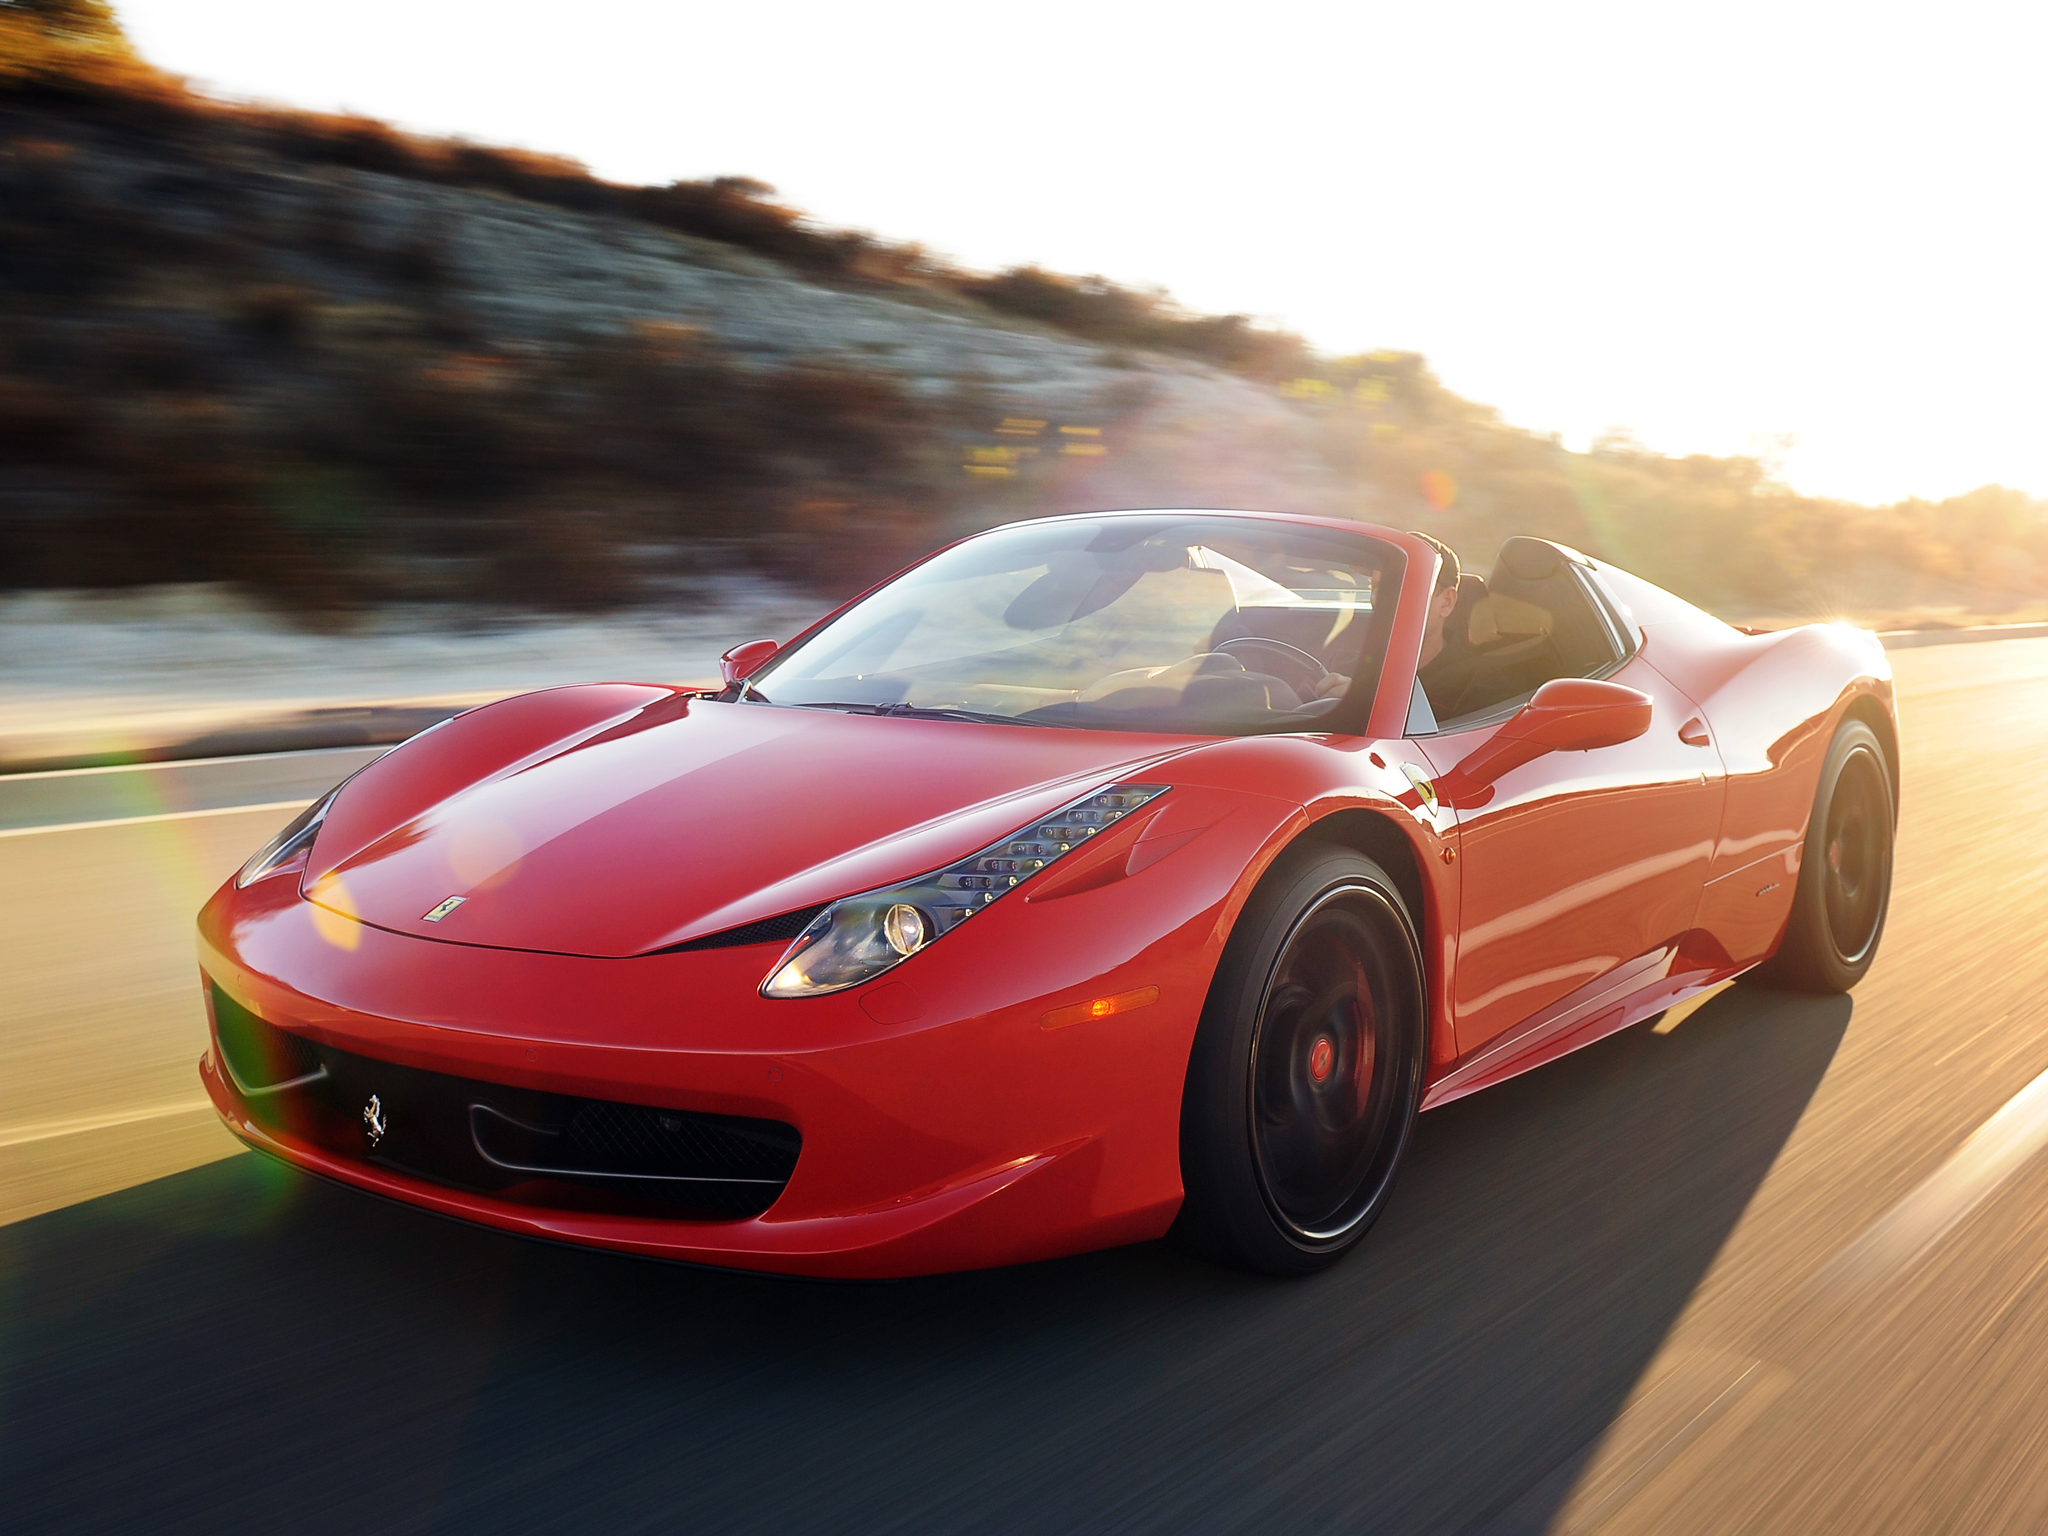 2013 Hennessey Ferrari 458 Spider Hpe700 Twin Turbo Supercar Wallpapers Hd Desktop And